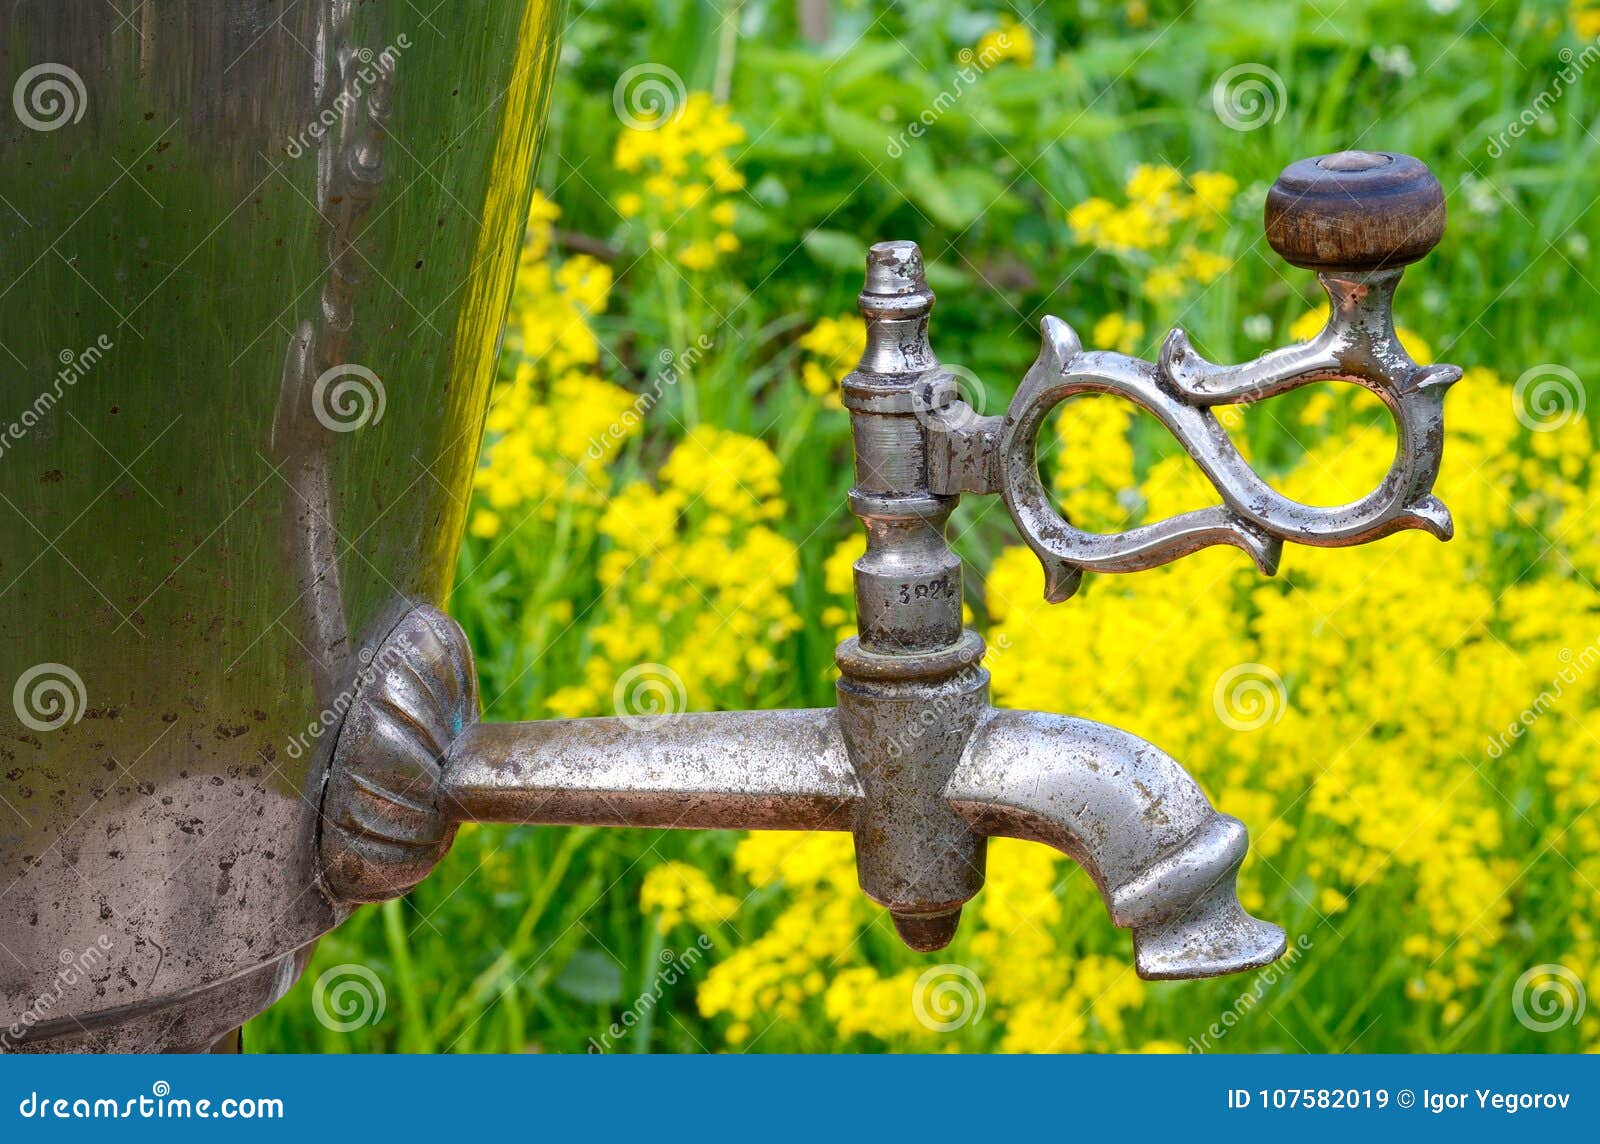 Water Faucet Spout Samovar Stock Image Image Of Design 107582019